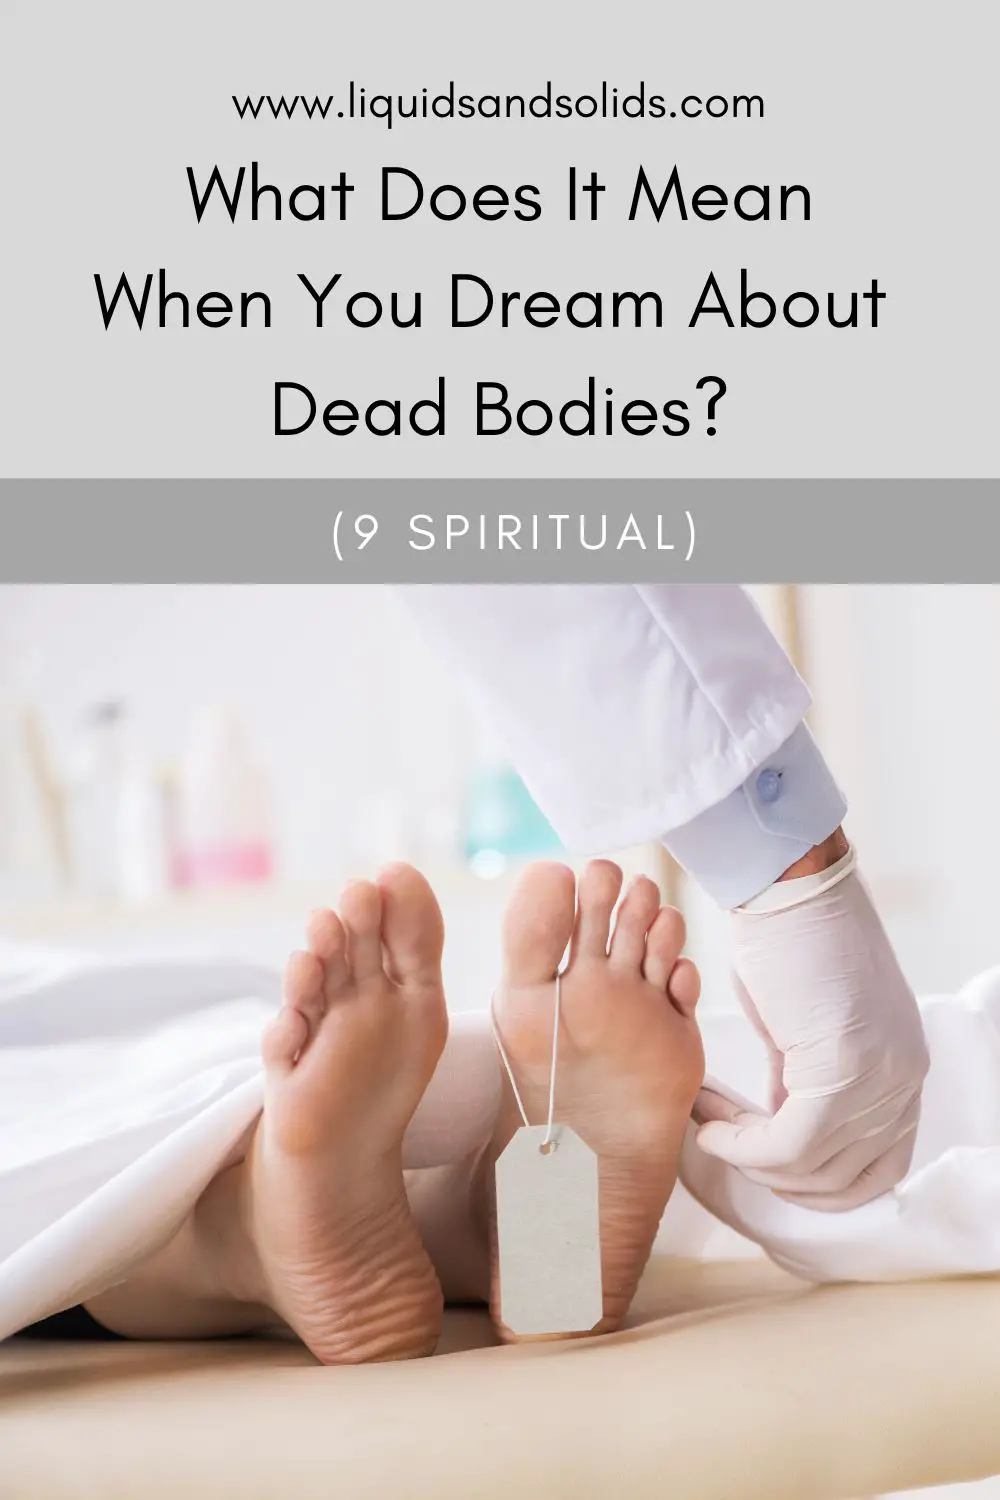 How To Deal With Nightmares Of Dead Person Alive In Coffin